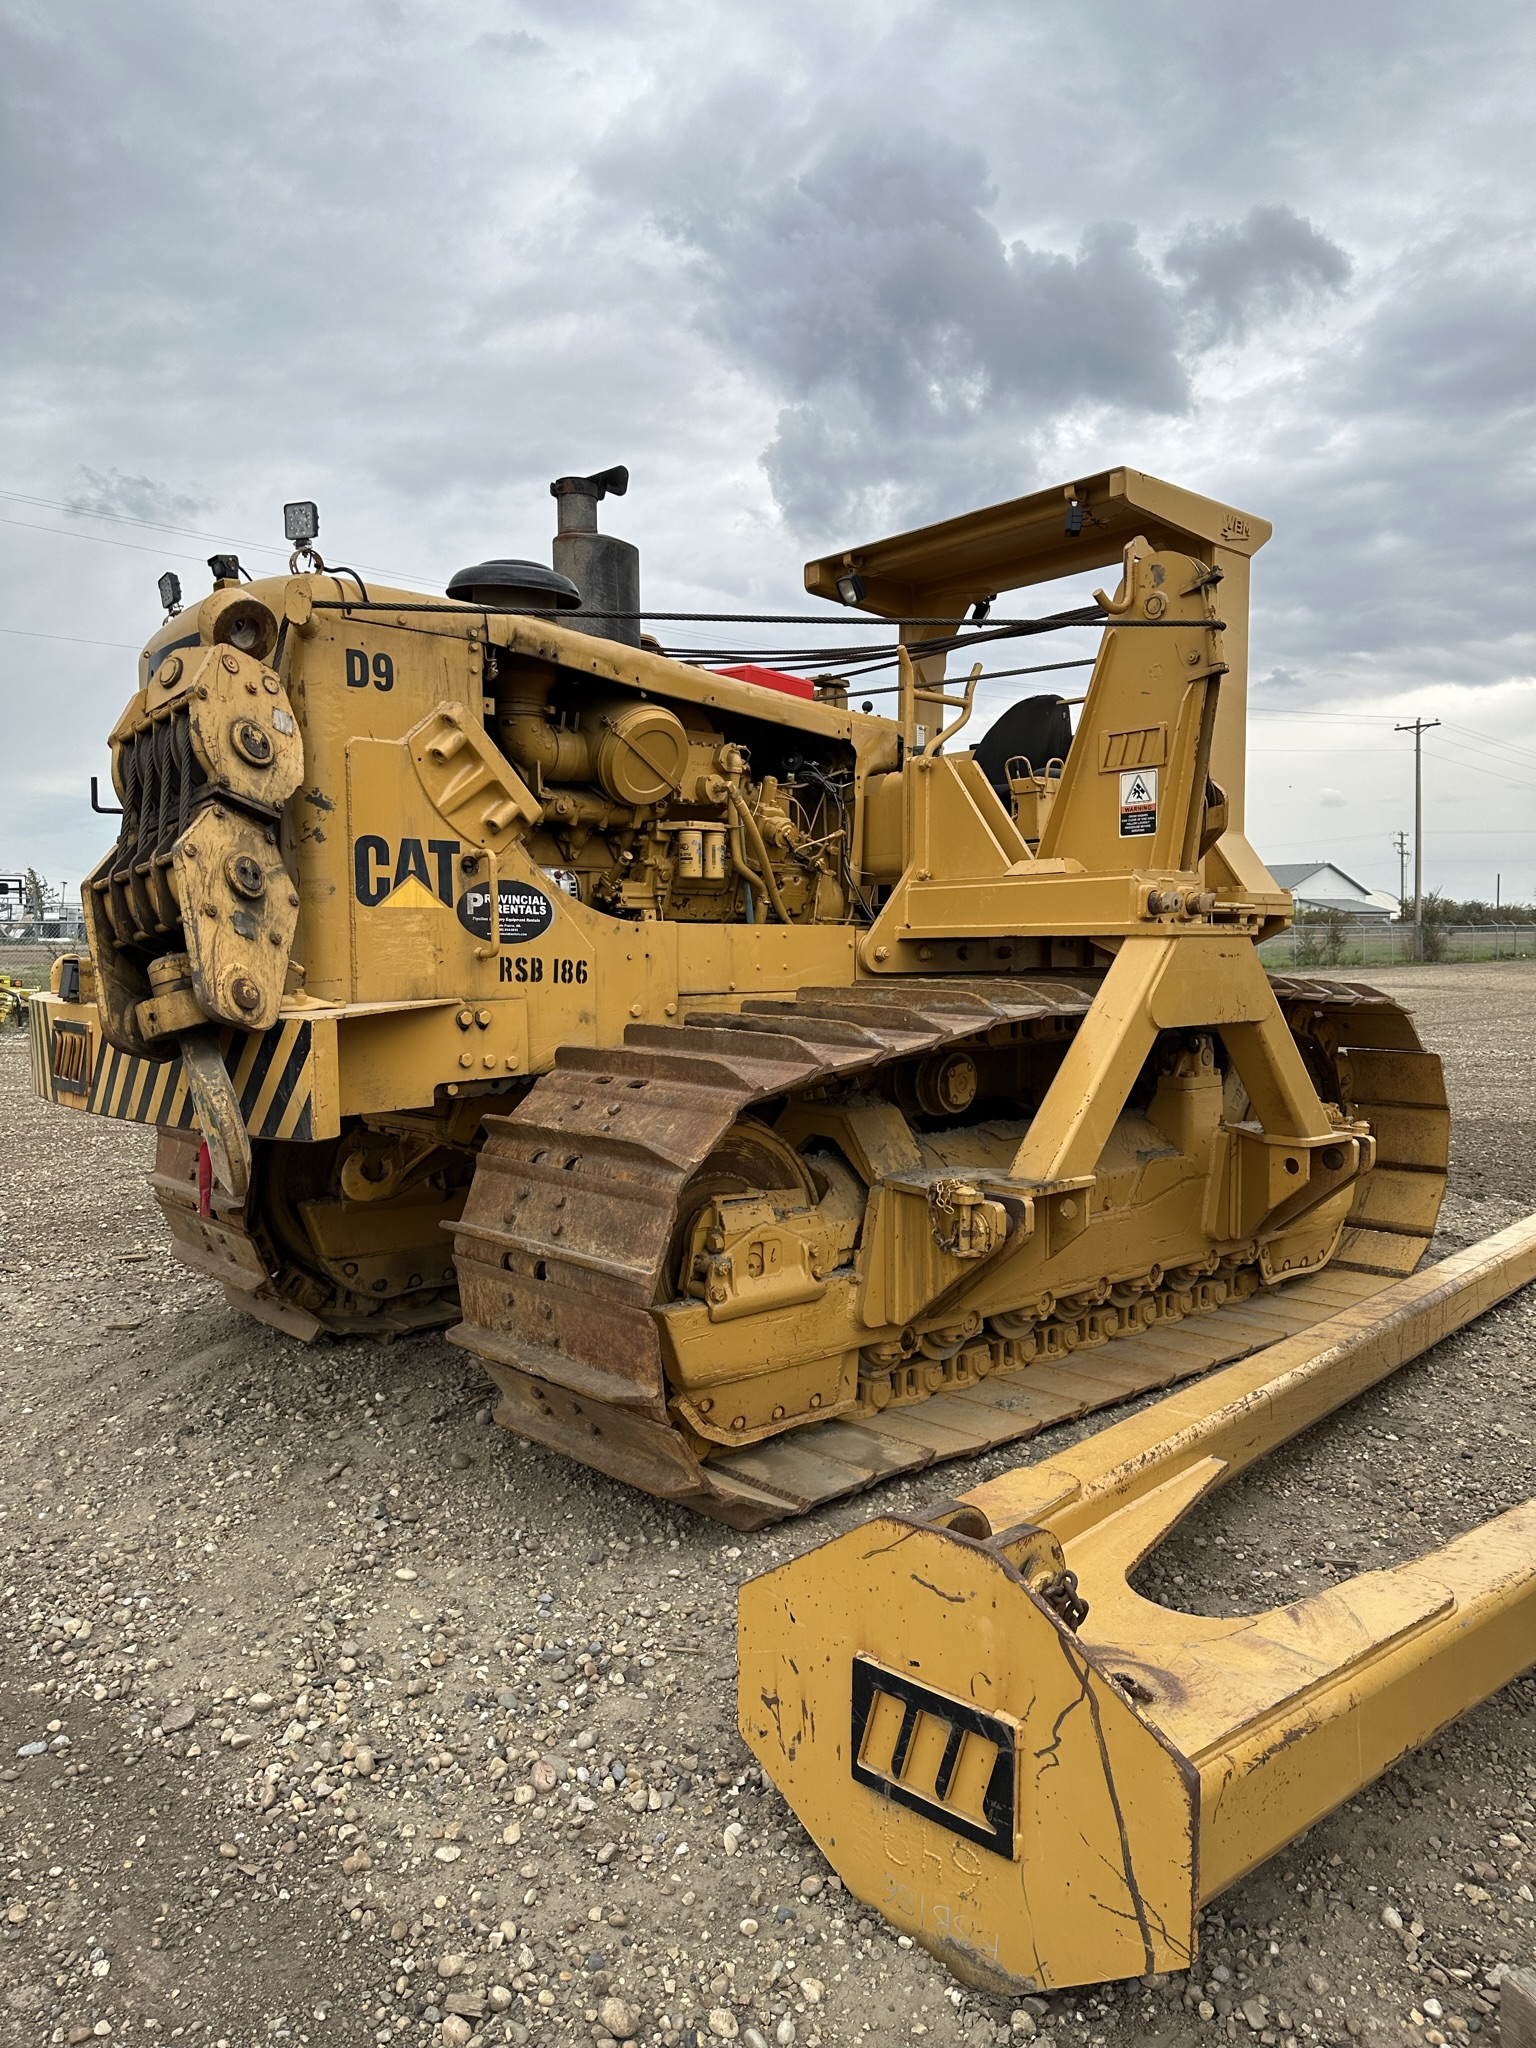 Featured image for “Caterpillar 594 G/H Side boom”